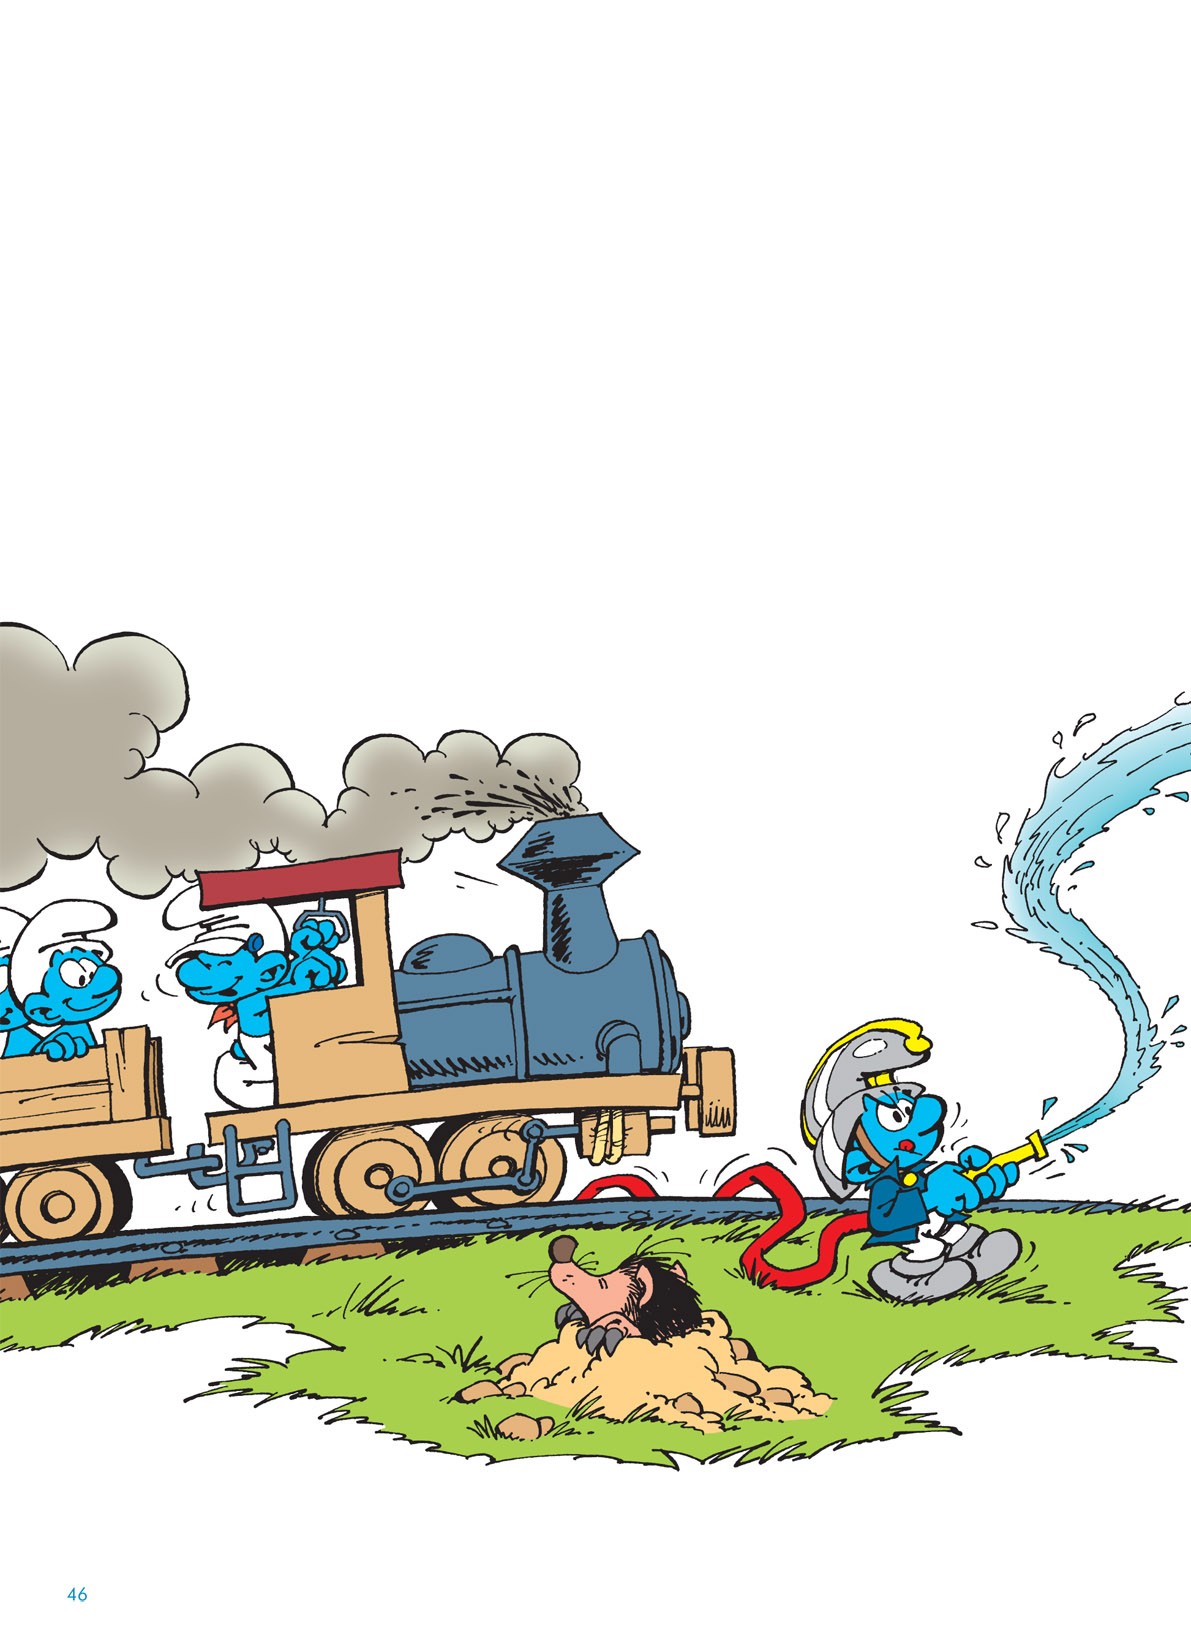 Read online The Smurfs comic -  Issue #8 - 46